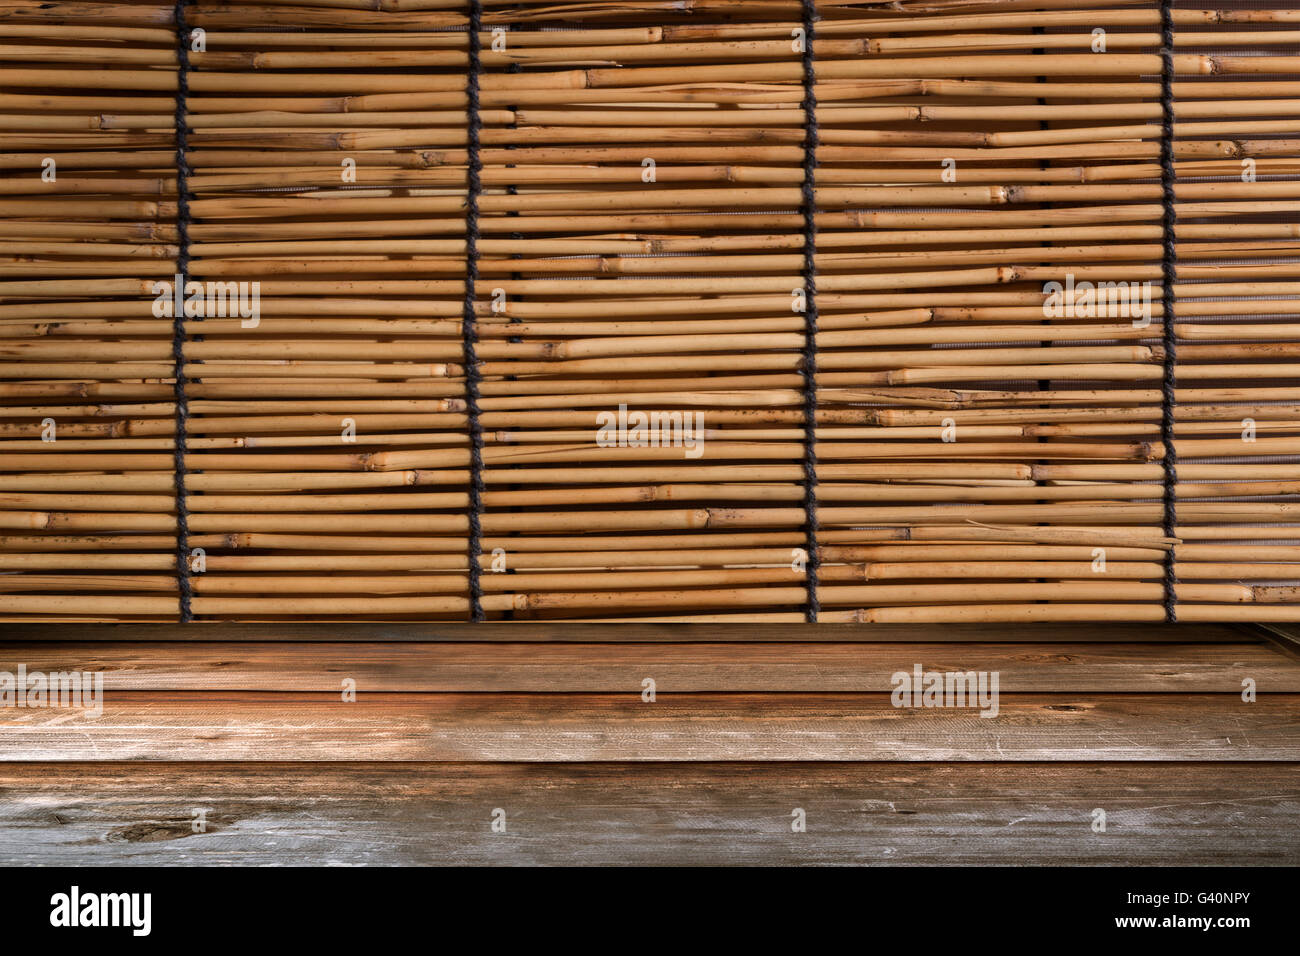 Wood tabletop in perspective view with bamboo curtain retro background Stock Photo